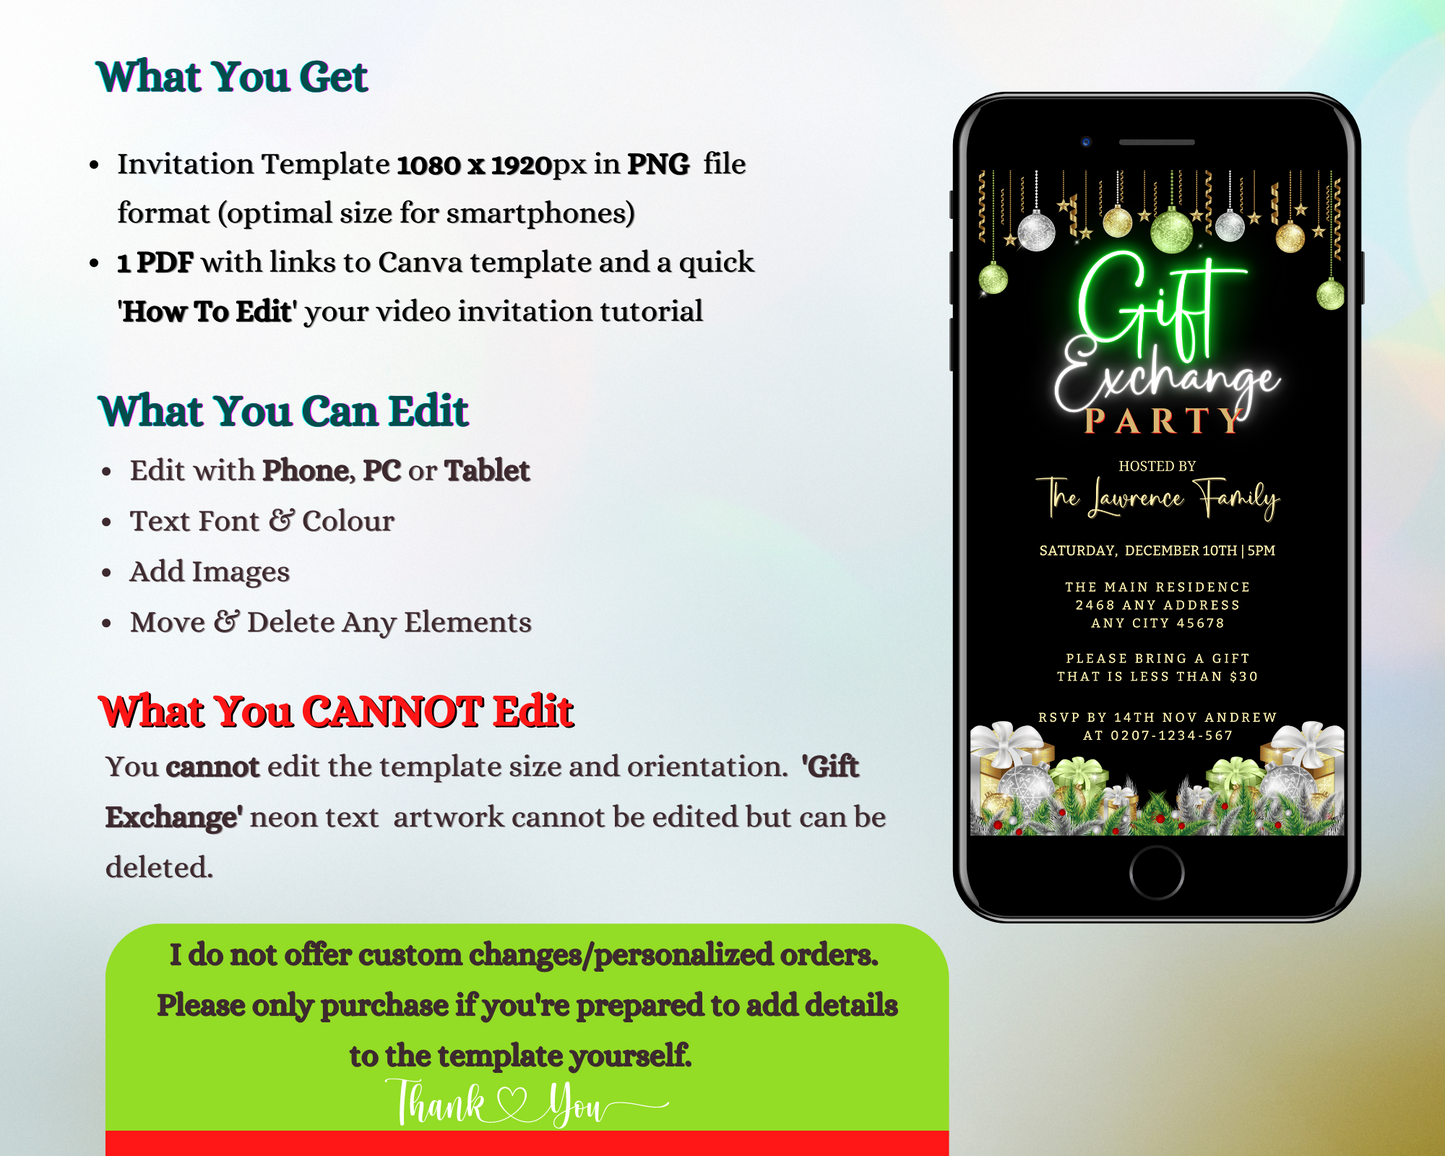 Green Neon Ornaments Gift Exchange Christmas Party Evite displayed on a smartphone screen with editable text and festive design elements.